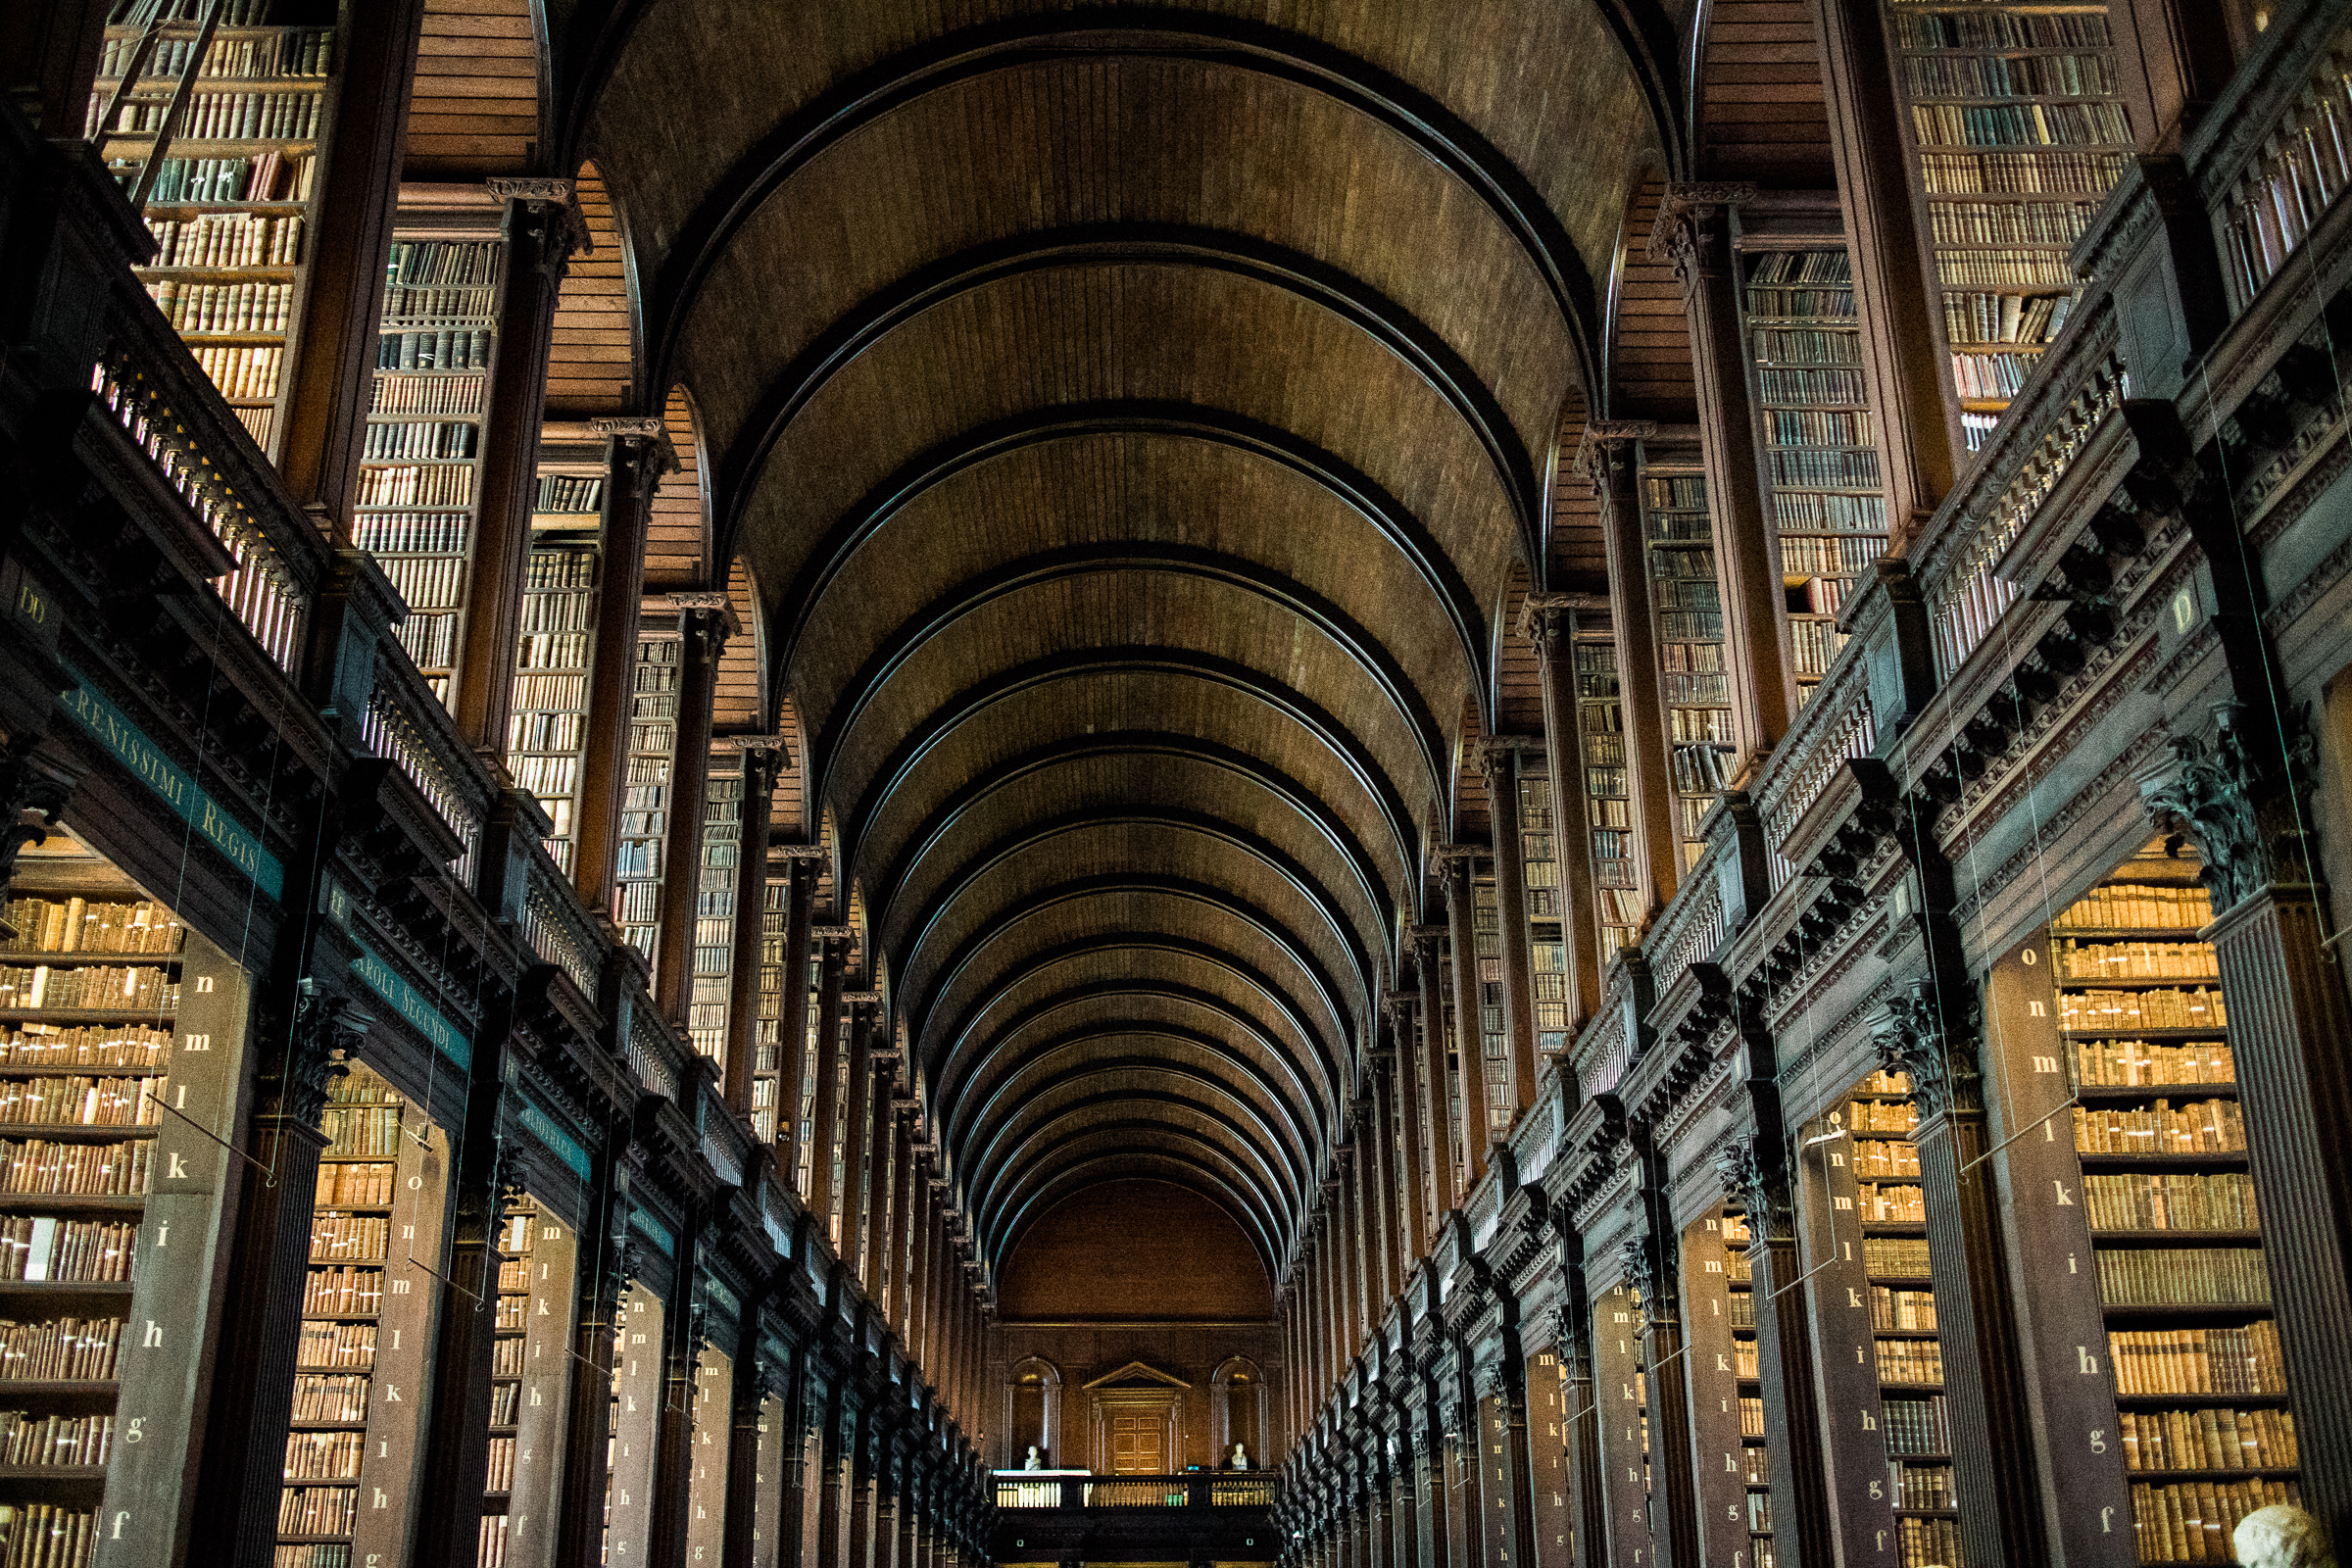  The Long Room &amp; The Book of Kells 